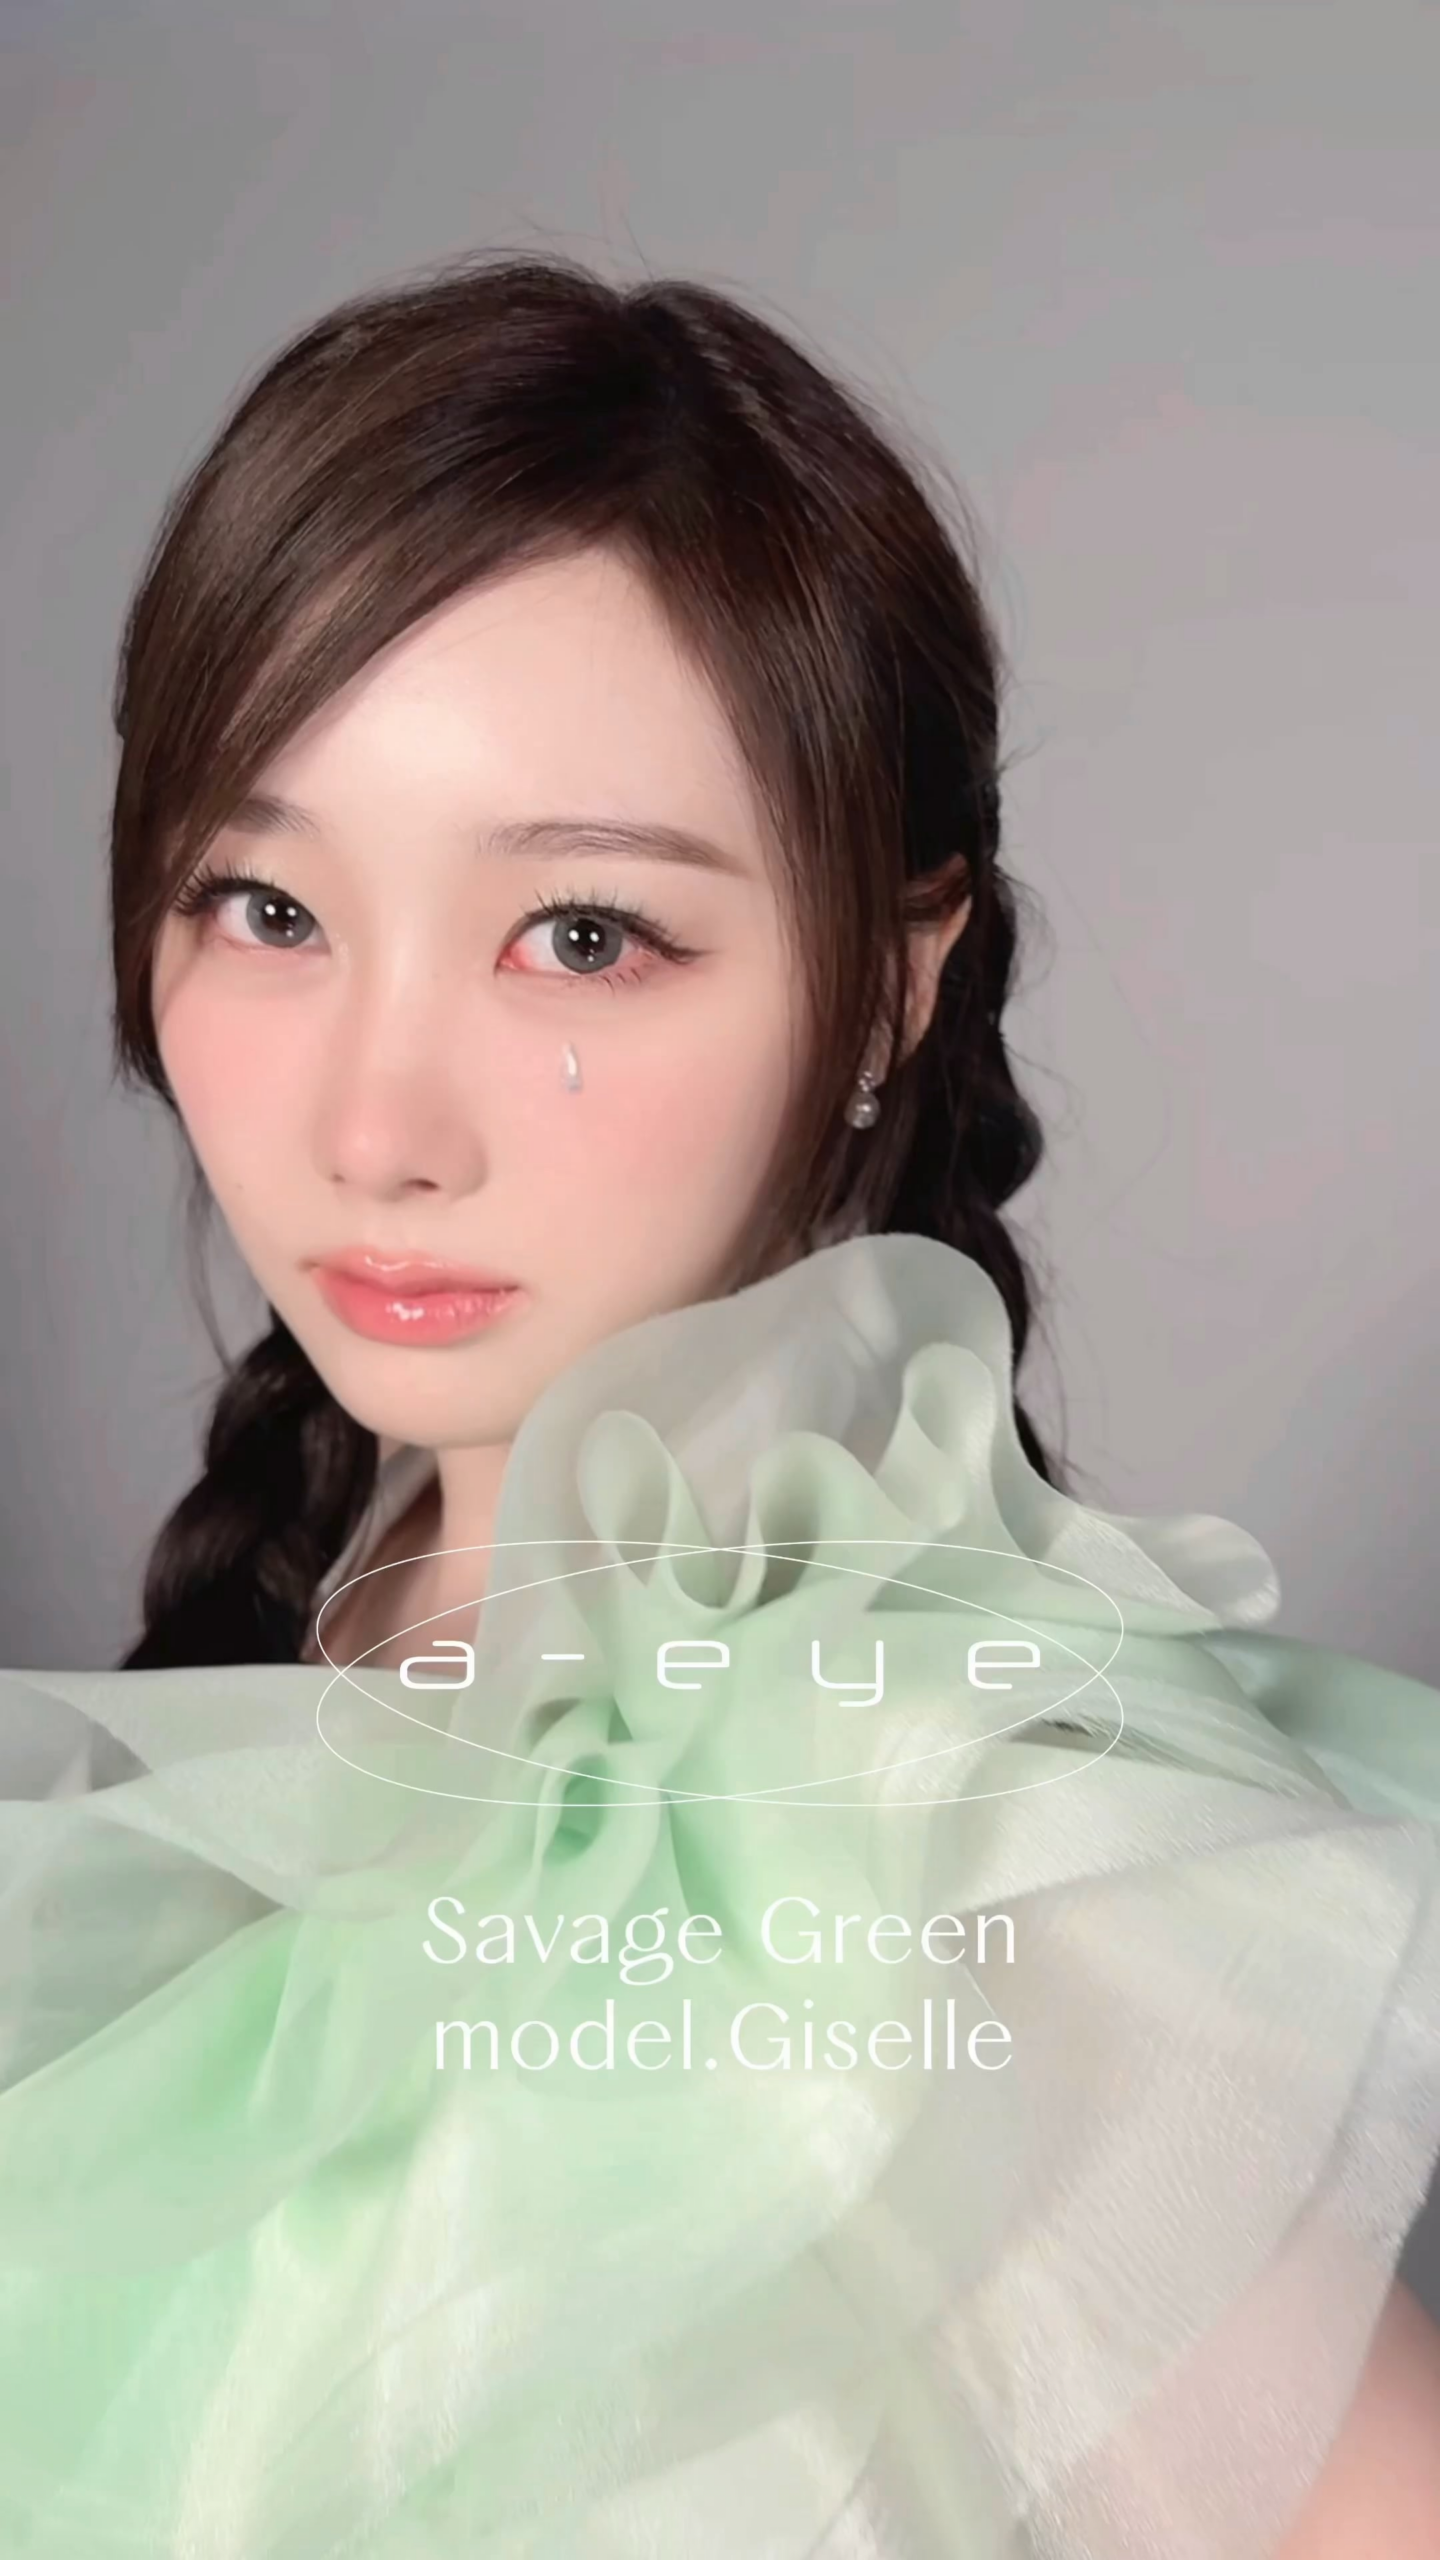 240627 Giselle for Refrear’s a-eye - aespa colored contact lenses, Introducing ‘Savage Green’ worn by Giselle